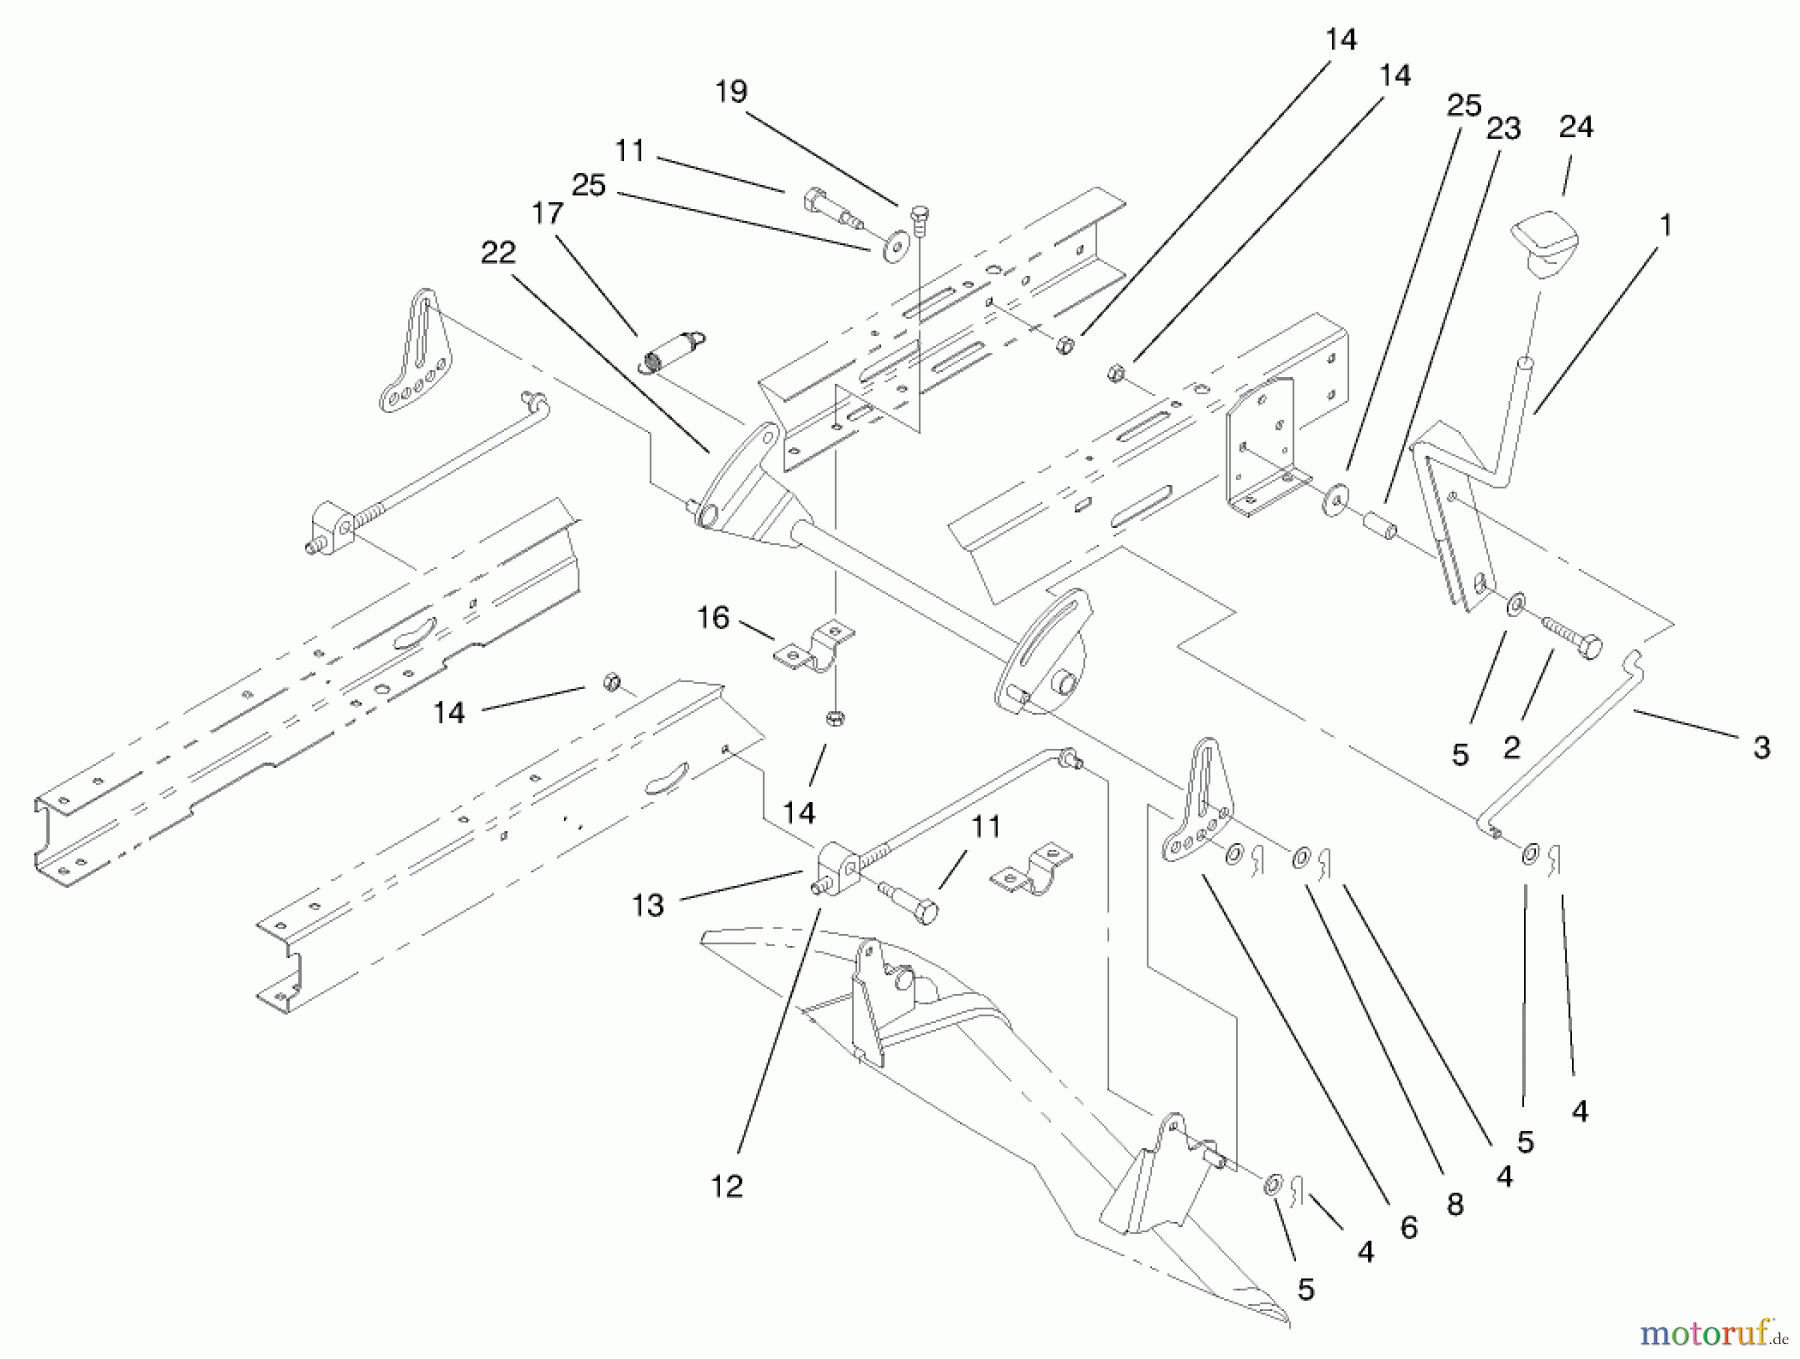  Toro Neu Mowers, Lawn & Garden Tractor Seite 1 71209 (13-32XLE) - Toro 13-32XLE Lawn Tractor, 2000 (200000001-200999999) HEIGHT OF CUT COMPONENTS ASSEMBLY